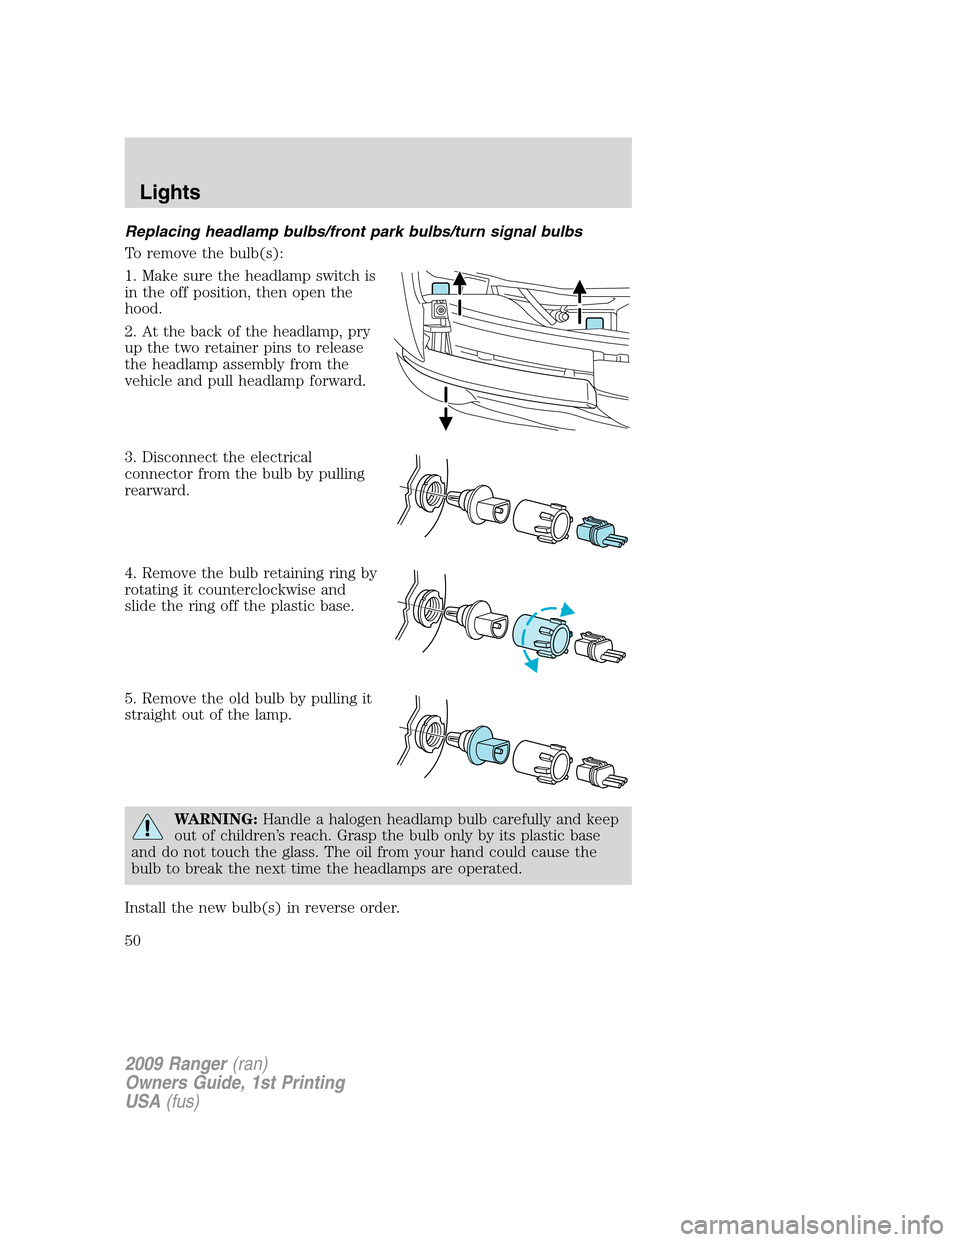 FORD RANGER 2009 2.G Owners Manual Replacing headlamp bulbs/front park bulbs/turn signal bulbs
To remove the bulb(s):
1. Make sure the headlamp switch is
in the off position, then open the
hood.
2. At the back of the headlamp, pry
up t